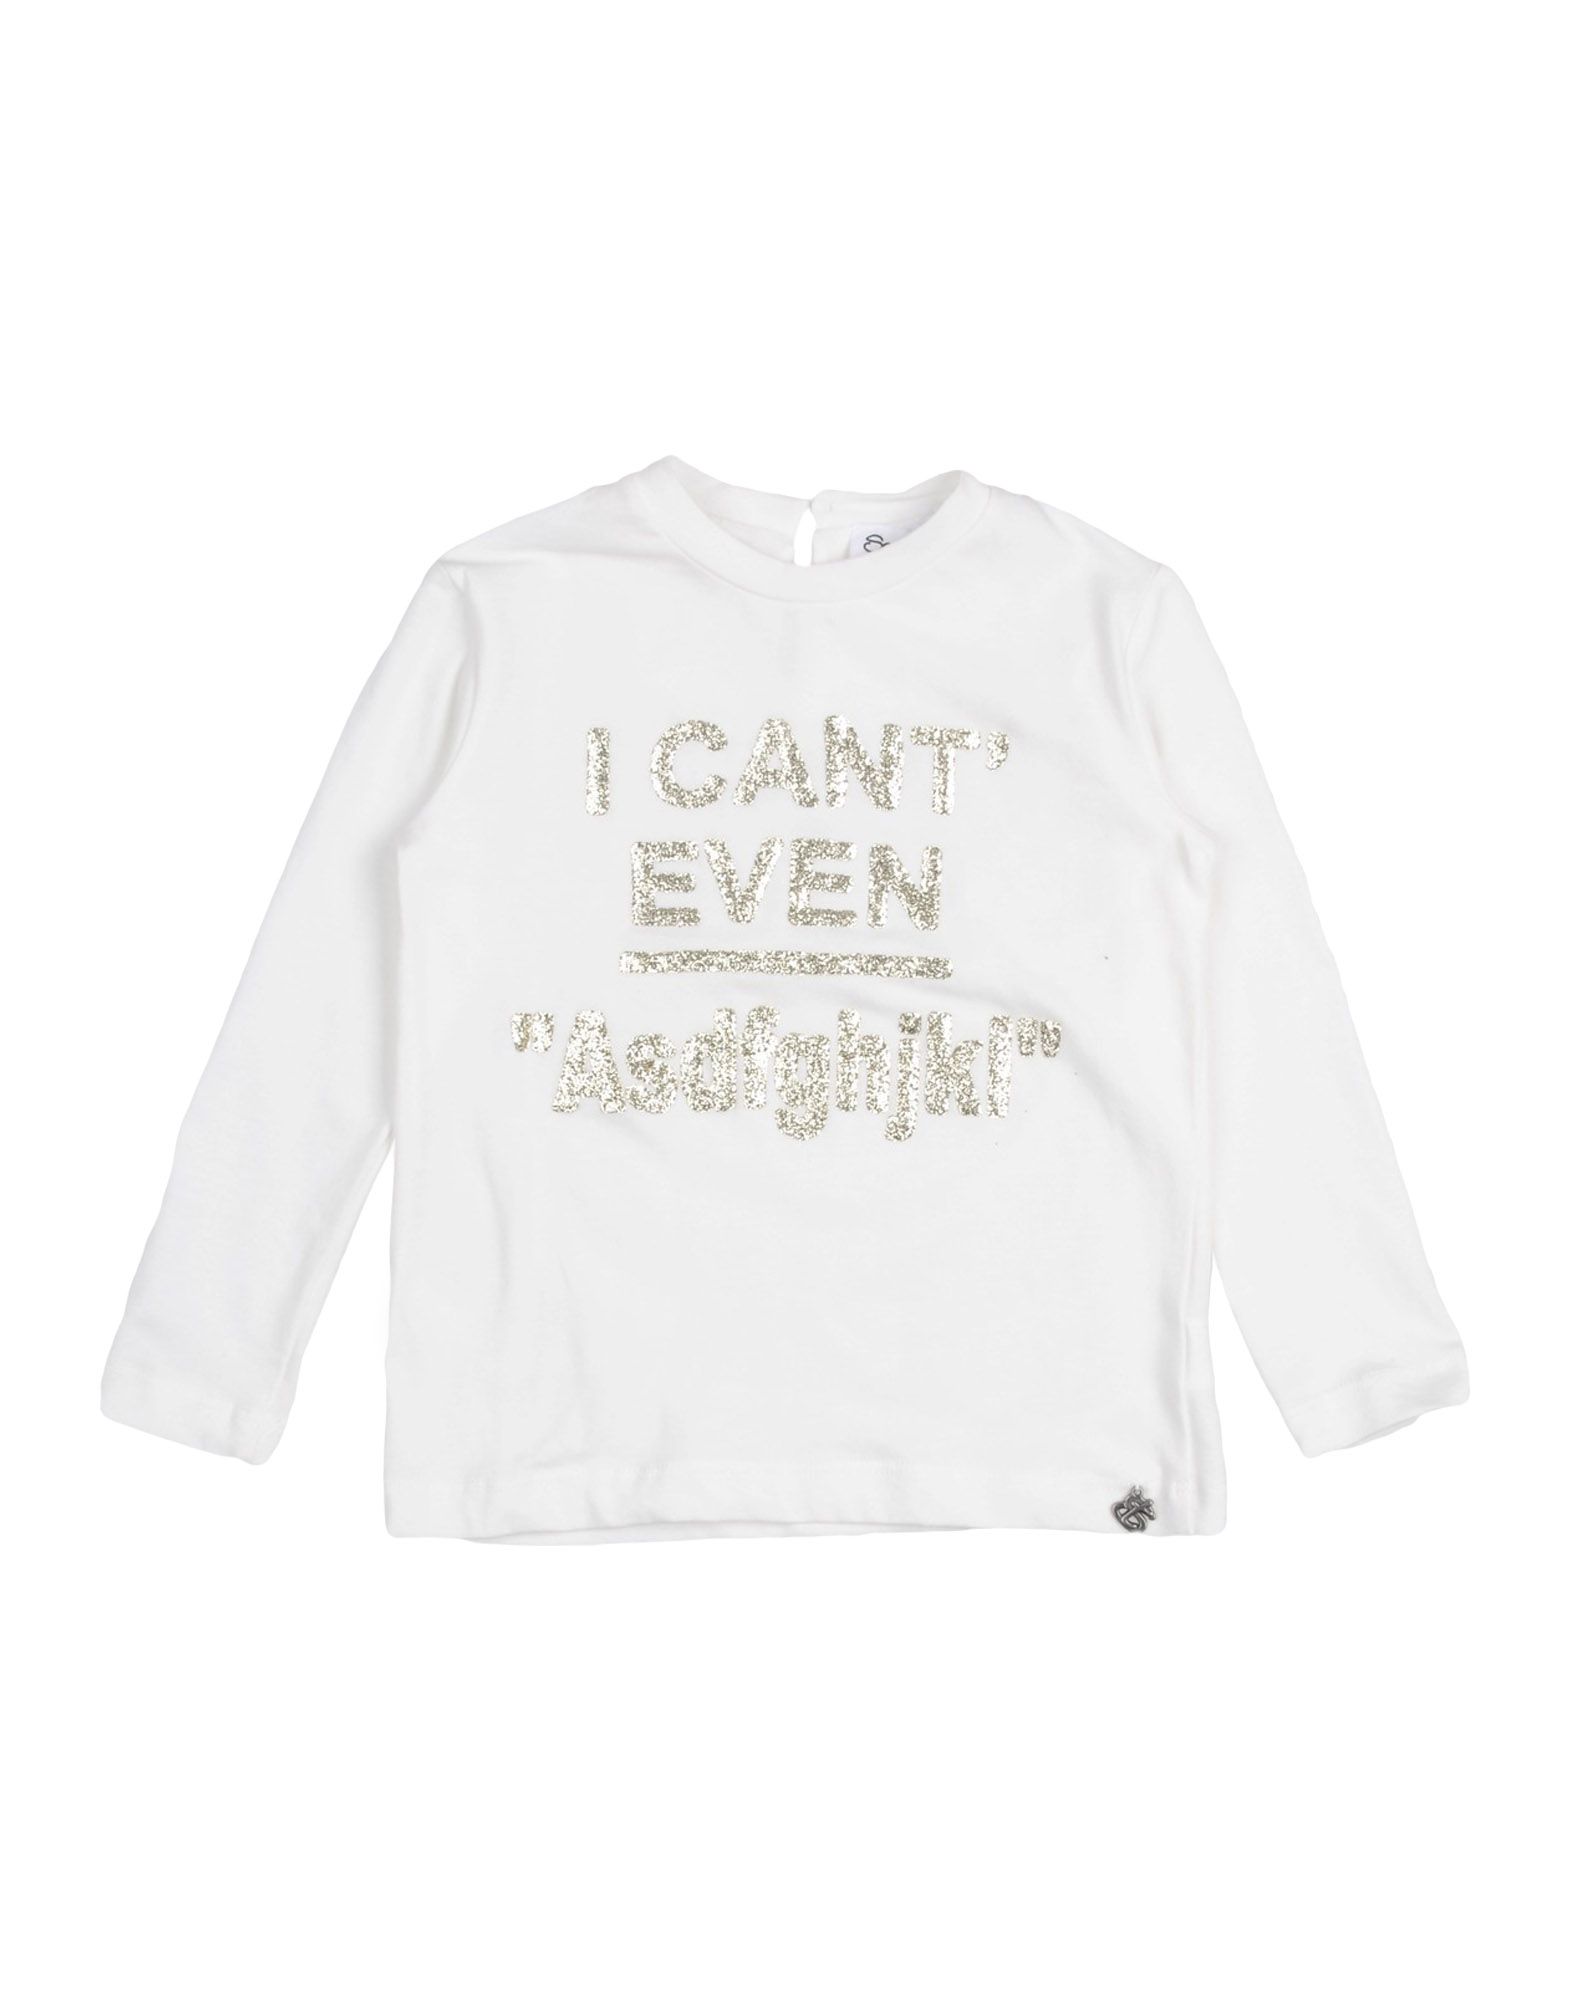 SO TWEE BY MISS GRANT T-SHIRTS,12014838XP 11